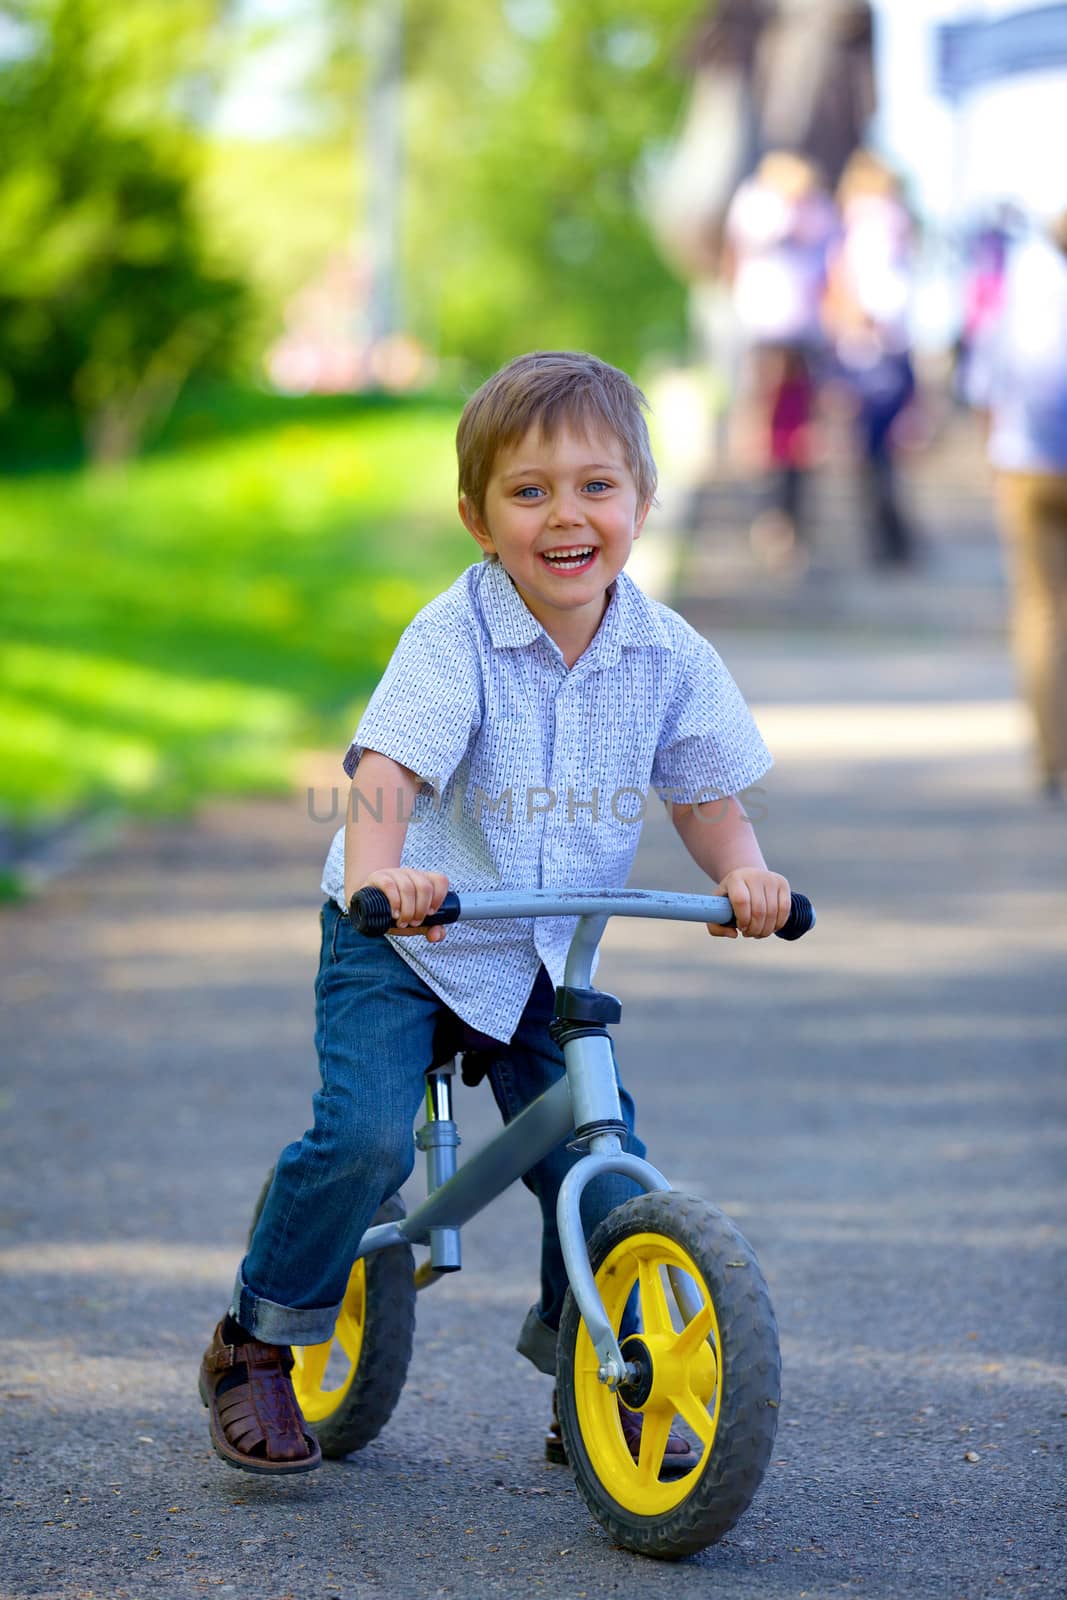 Little boy on a bicycle in the summer park